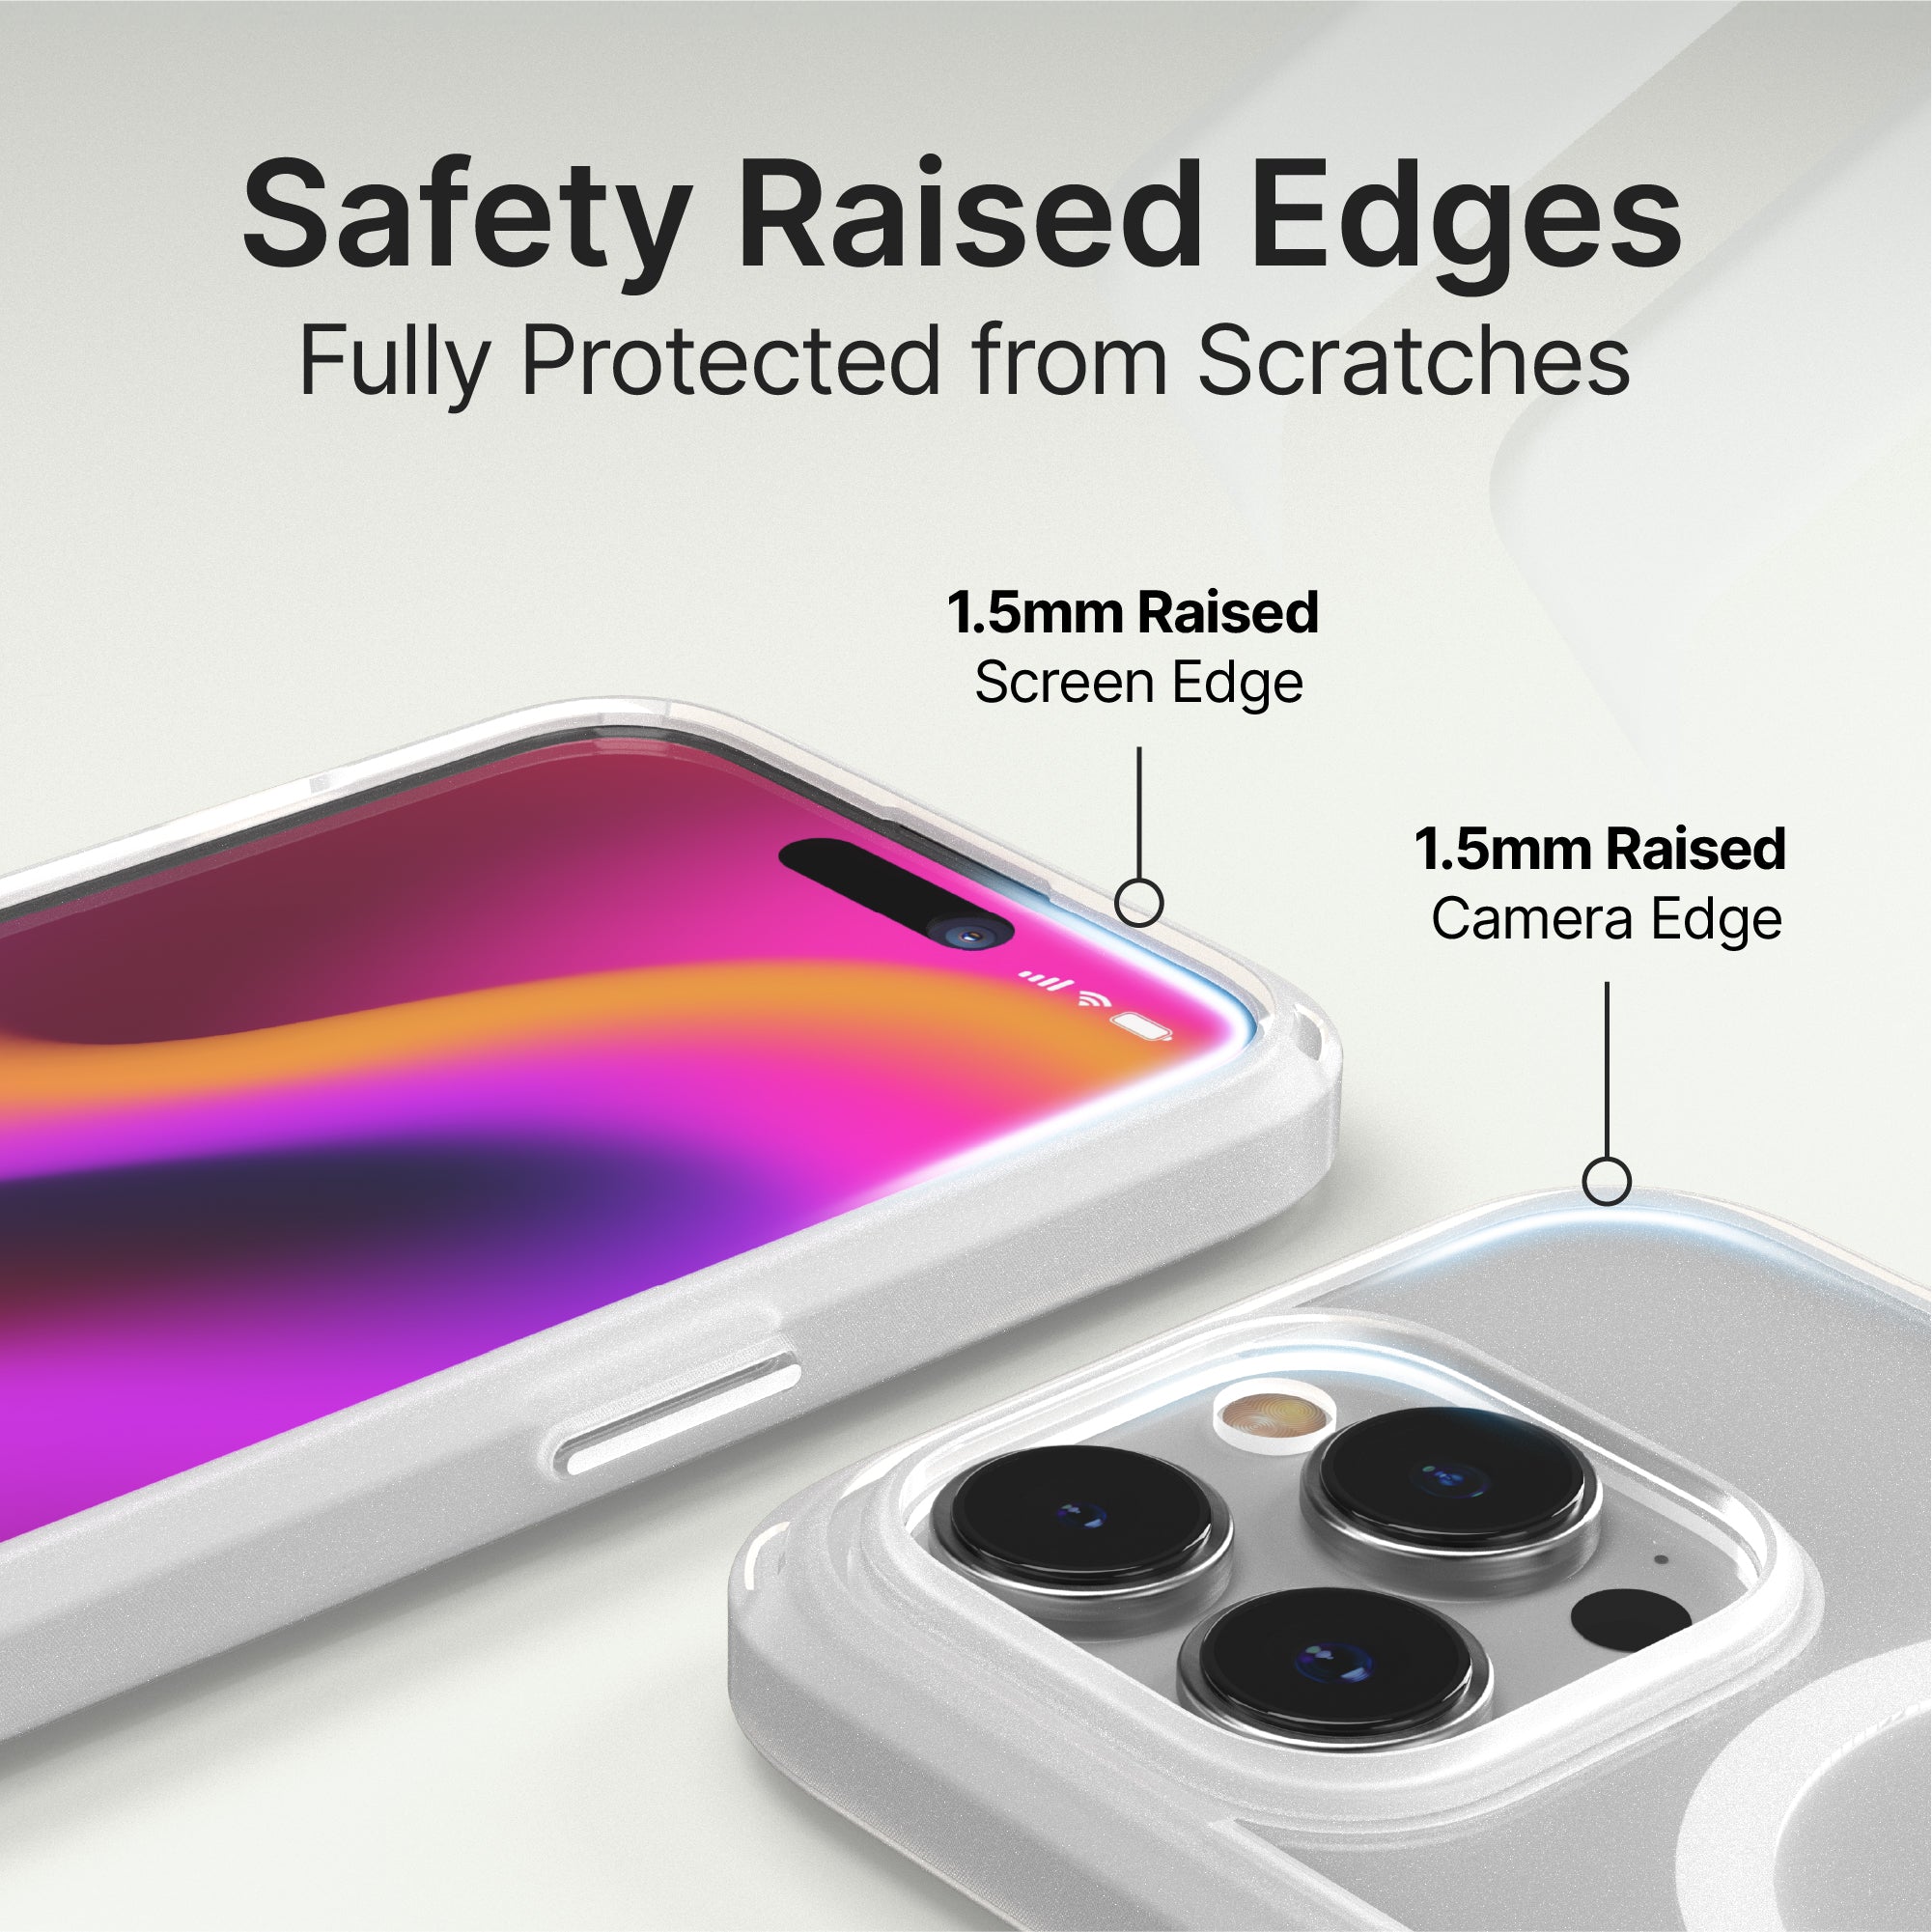 catalyst iphone 15 series influence case magsafe compatible cleark for iphone 15 pro max showing the safety raised edges for camera and screen text reads safety raised edges fully protected from scratches 1.5mm raised screen edge 1.5mm raised camera edge